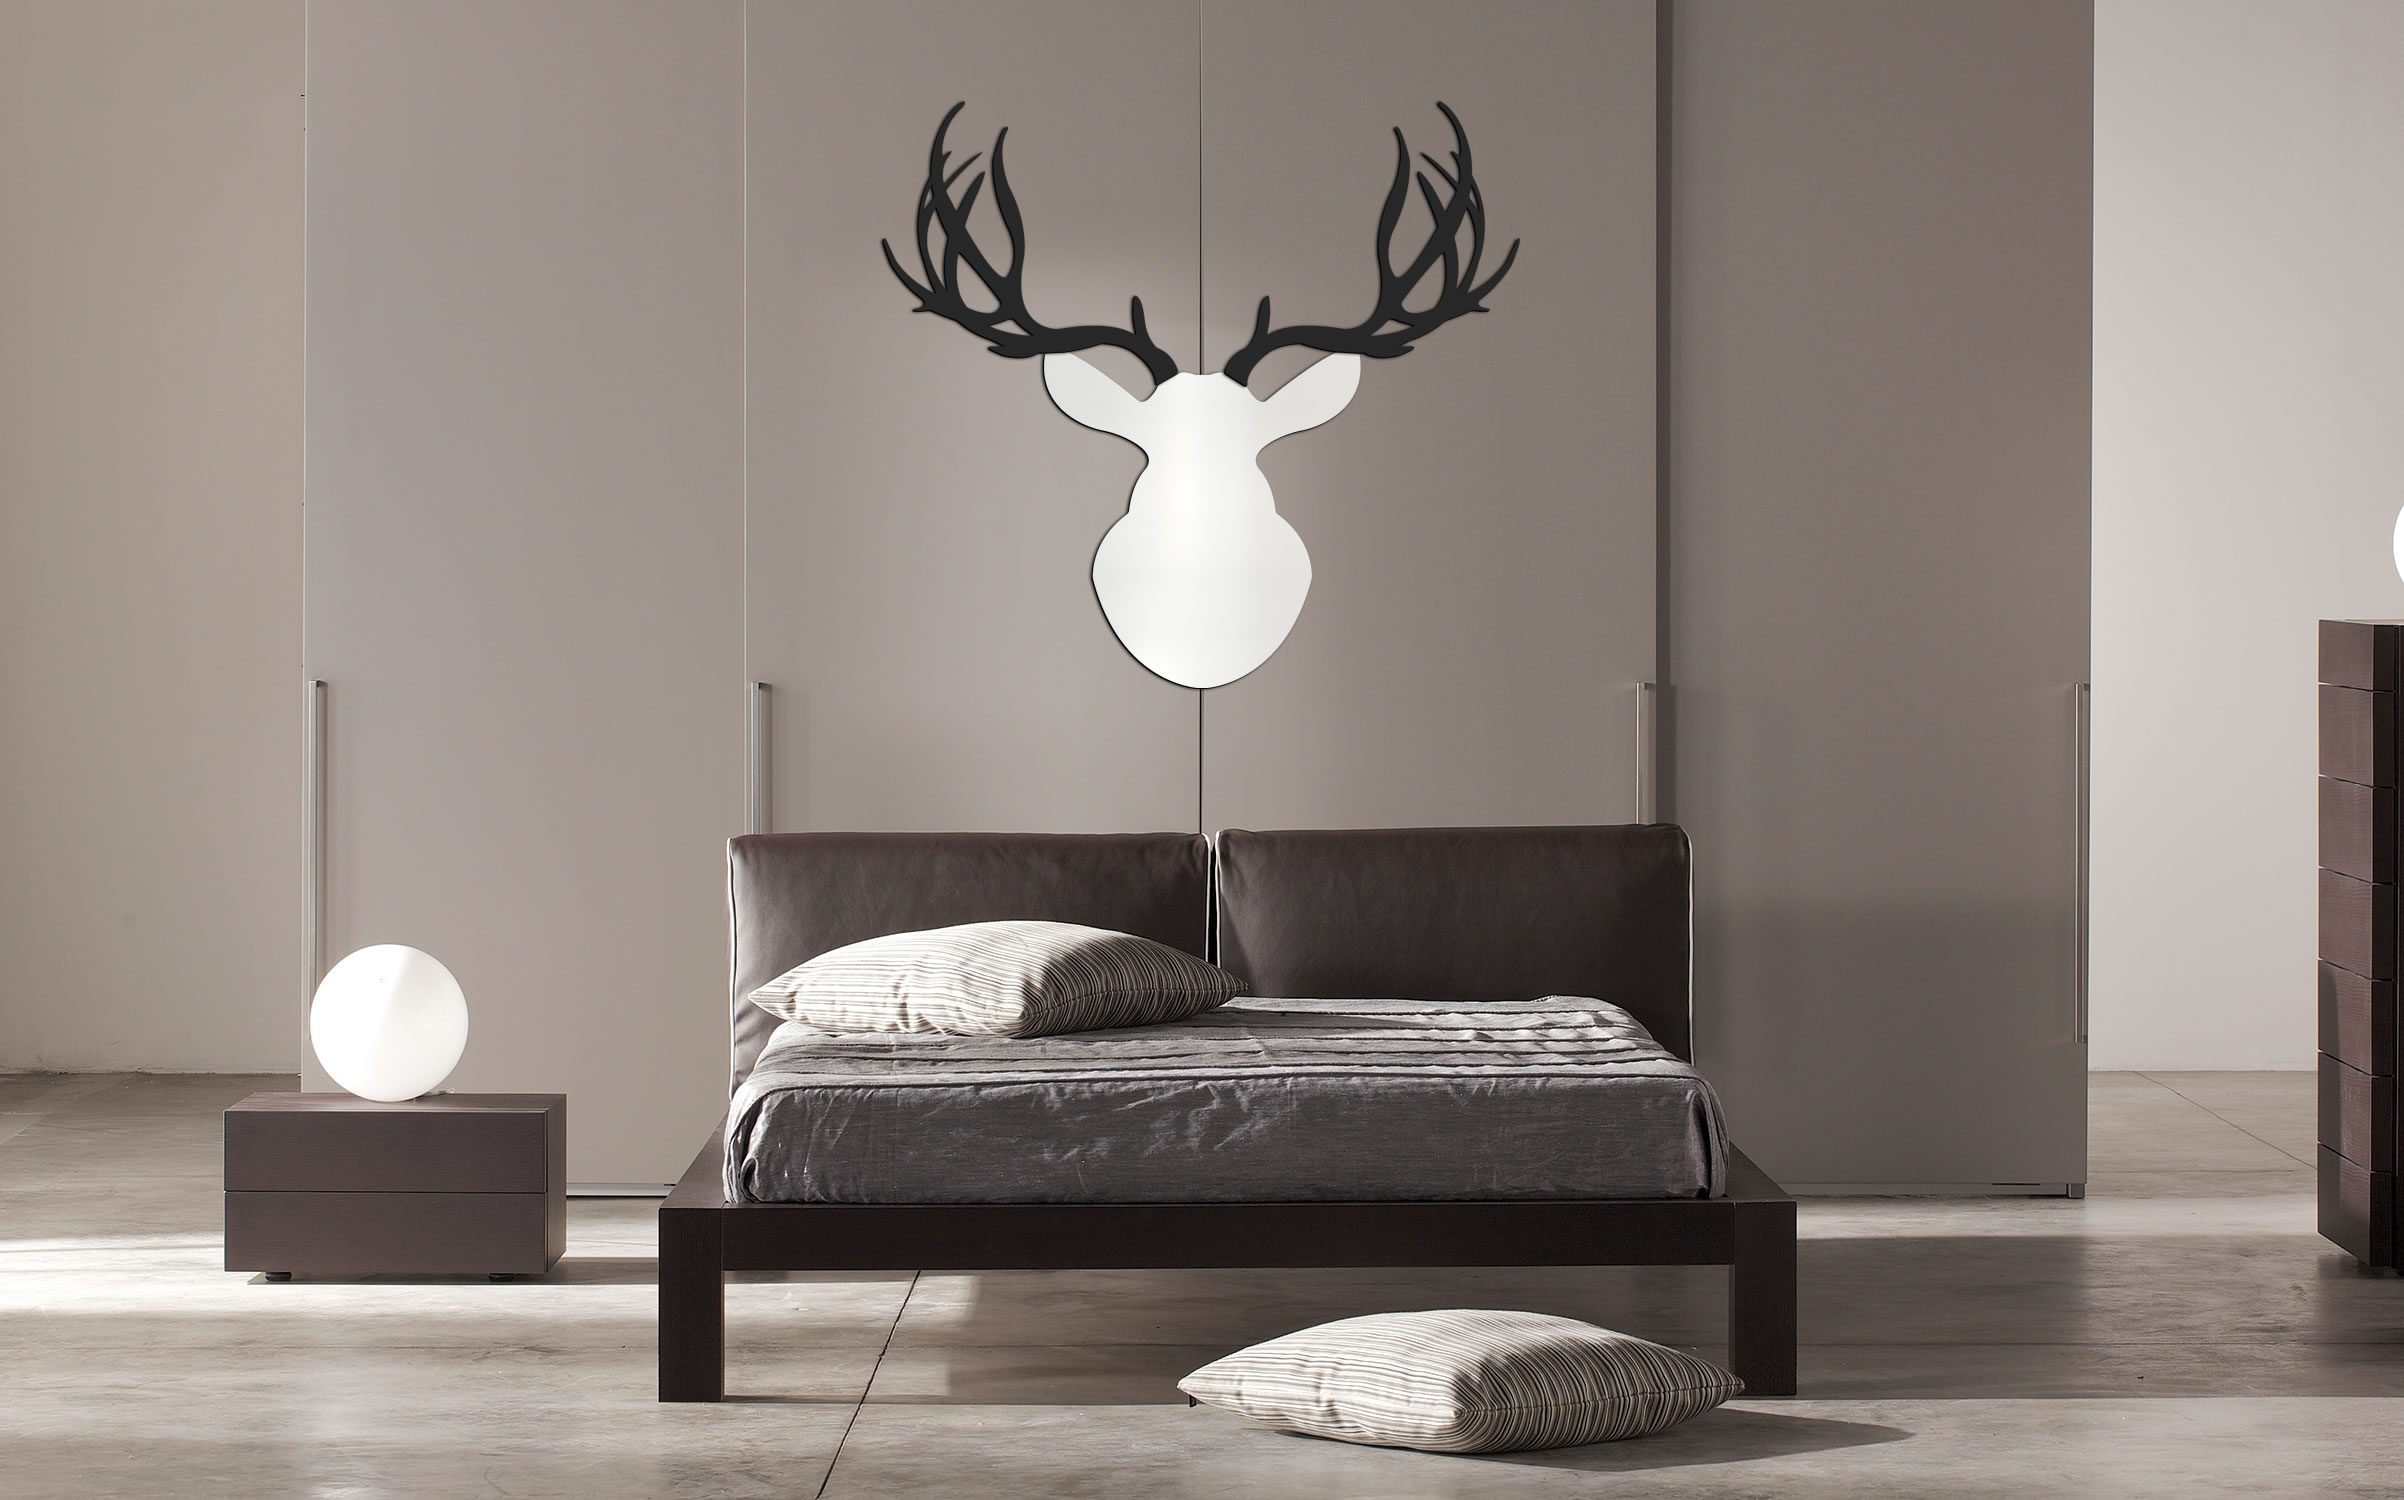 CONTEMPORARY BUCK - 36x36 in. White & Black Deer Cut-Out - Lifestyle Image